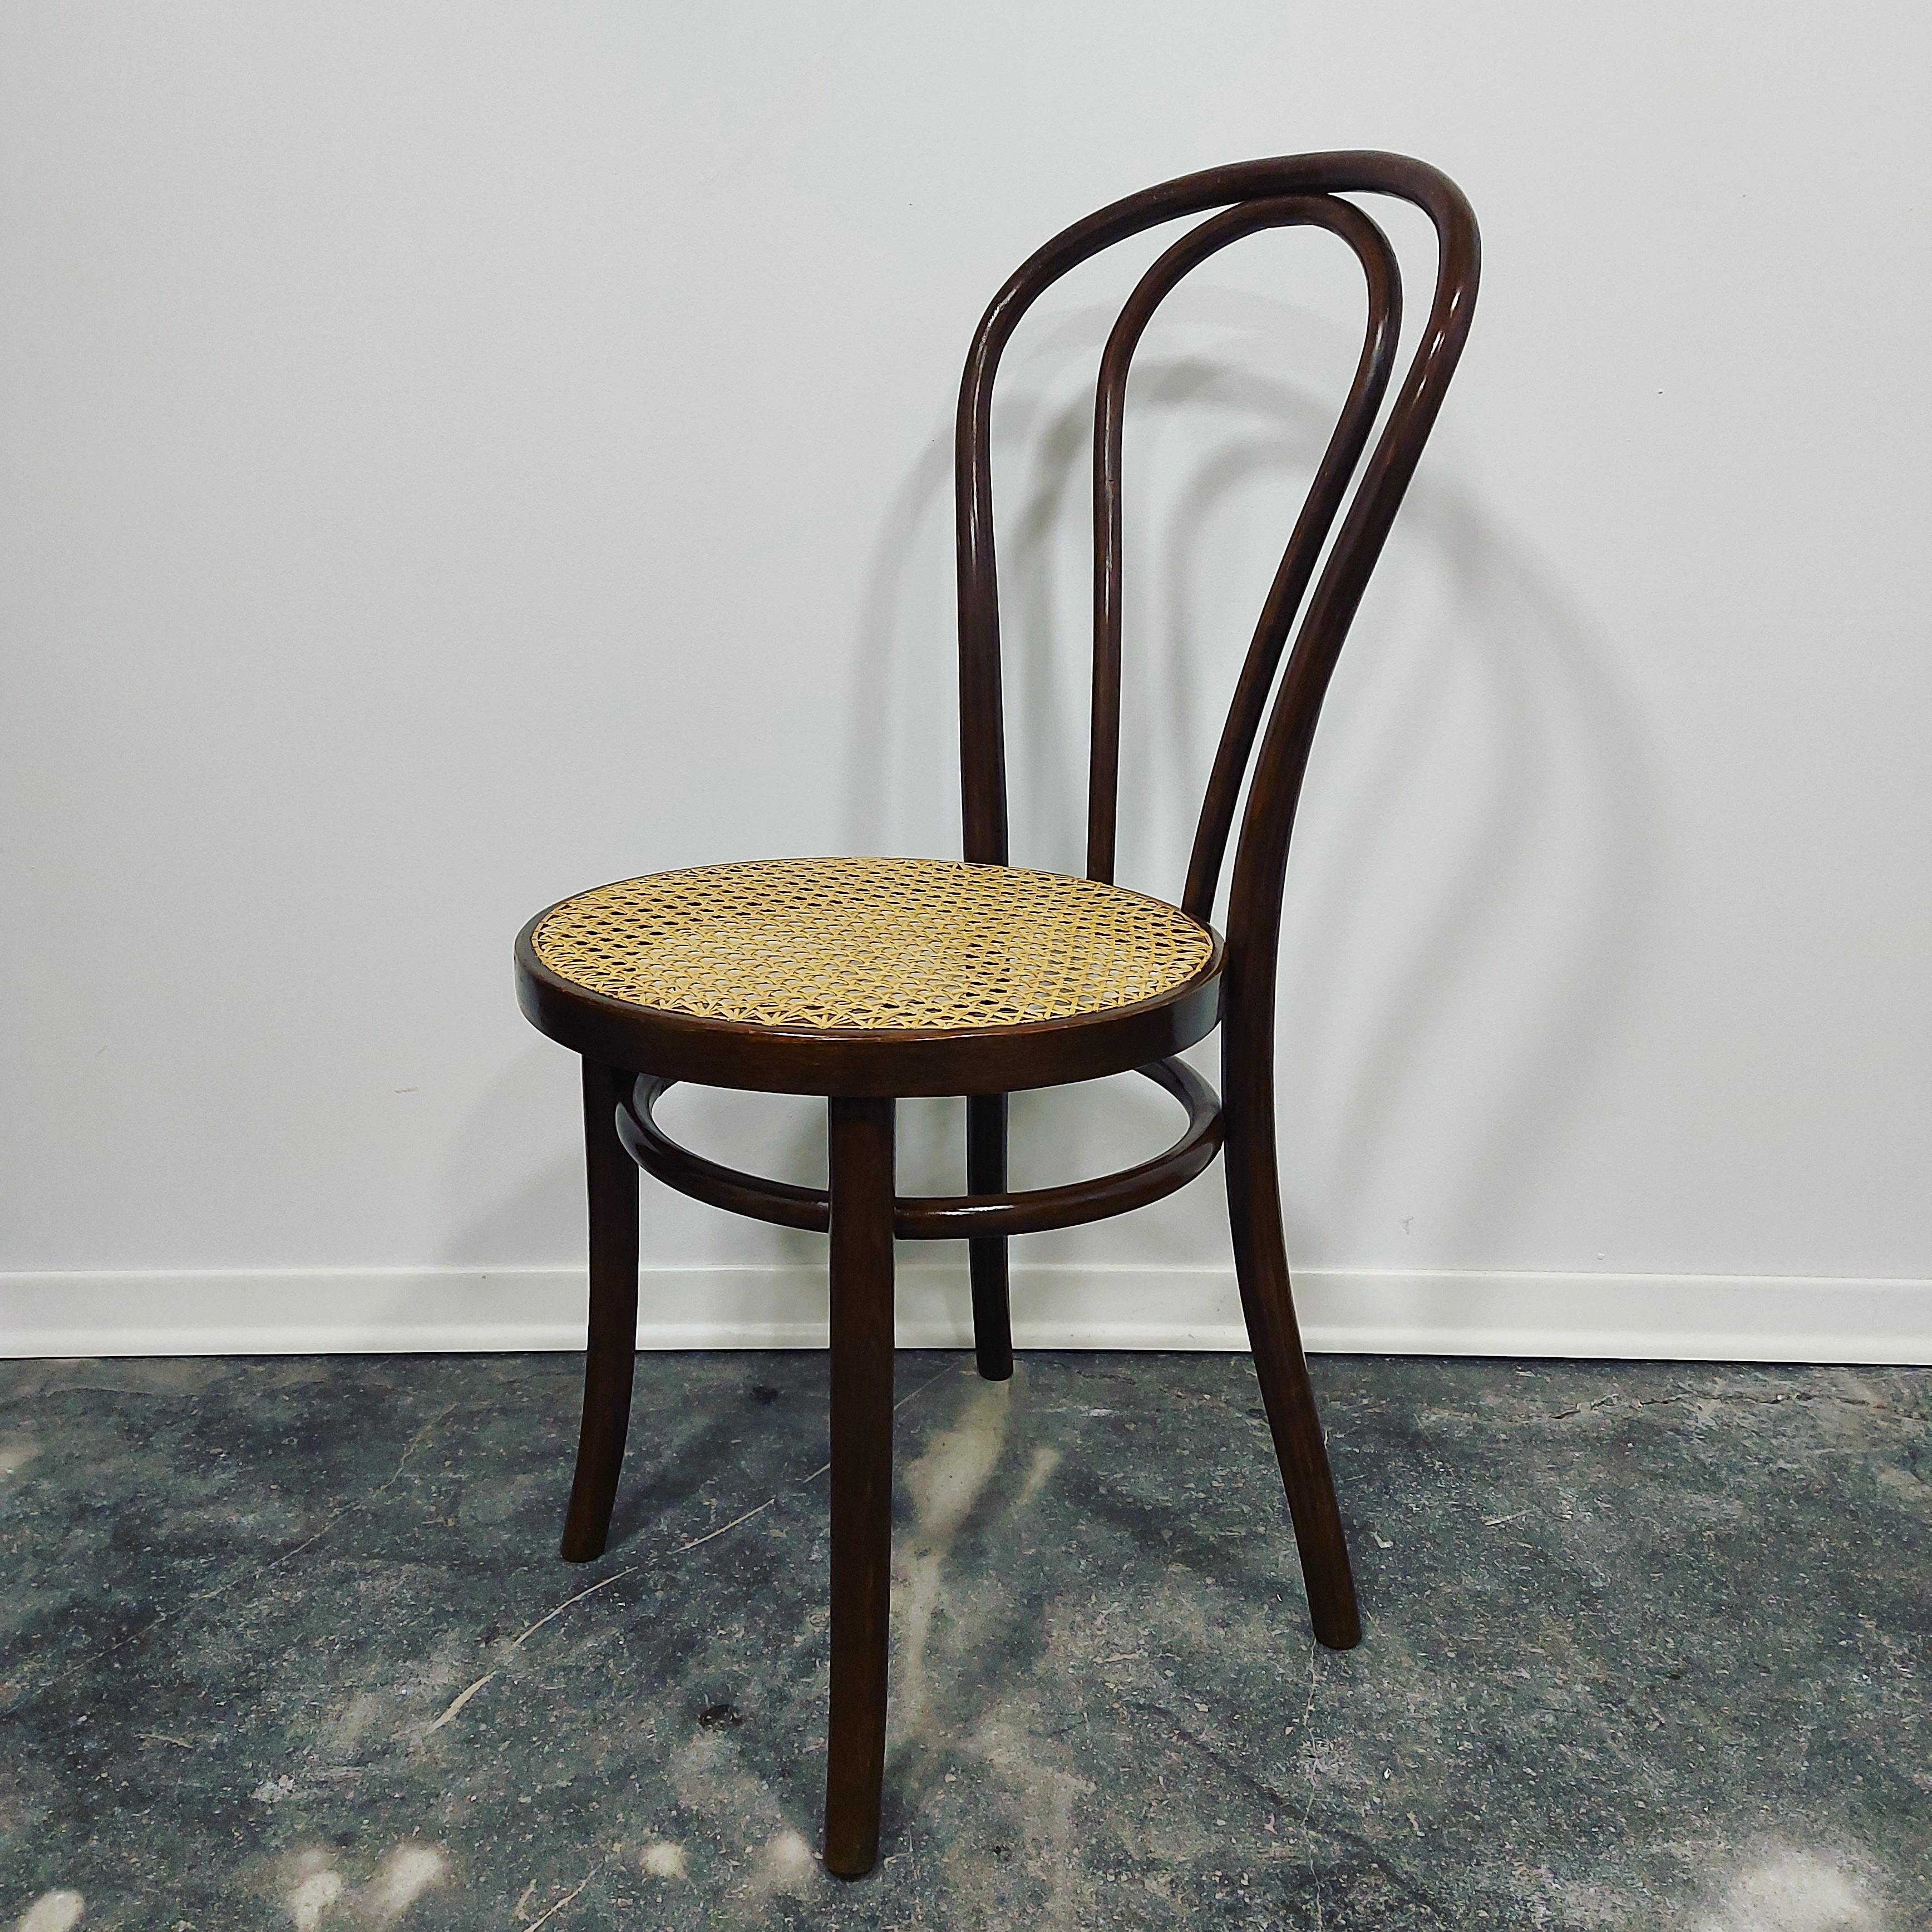 Chair known as model No. 18, with curved beech frame with blachandmade Vienna straw intact. Designed by Michael Thonet in 1876.